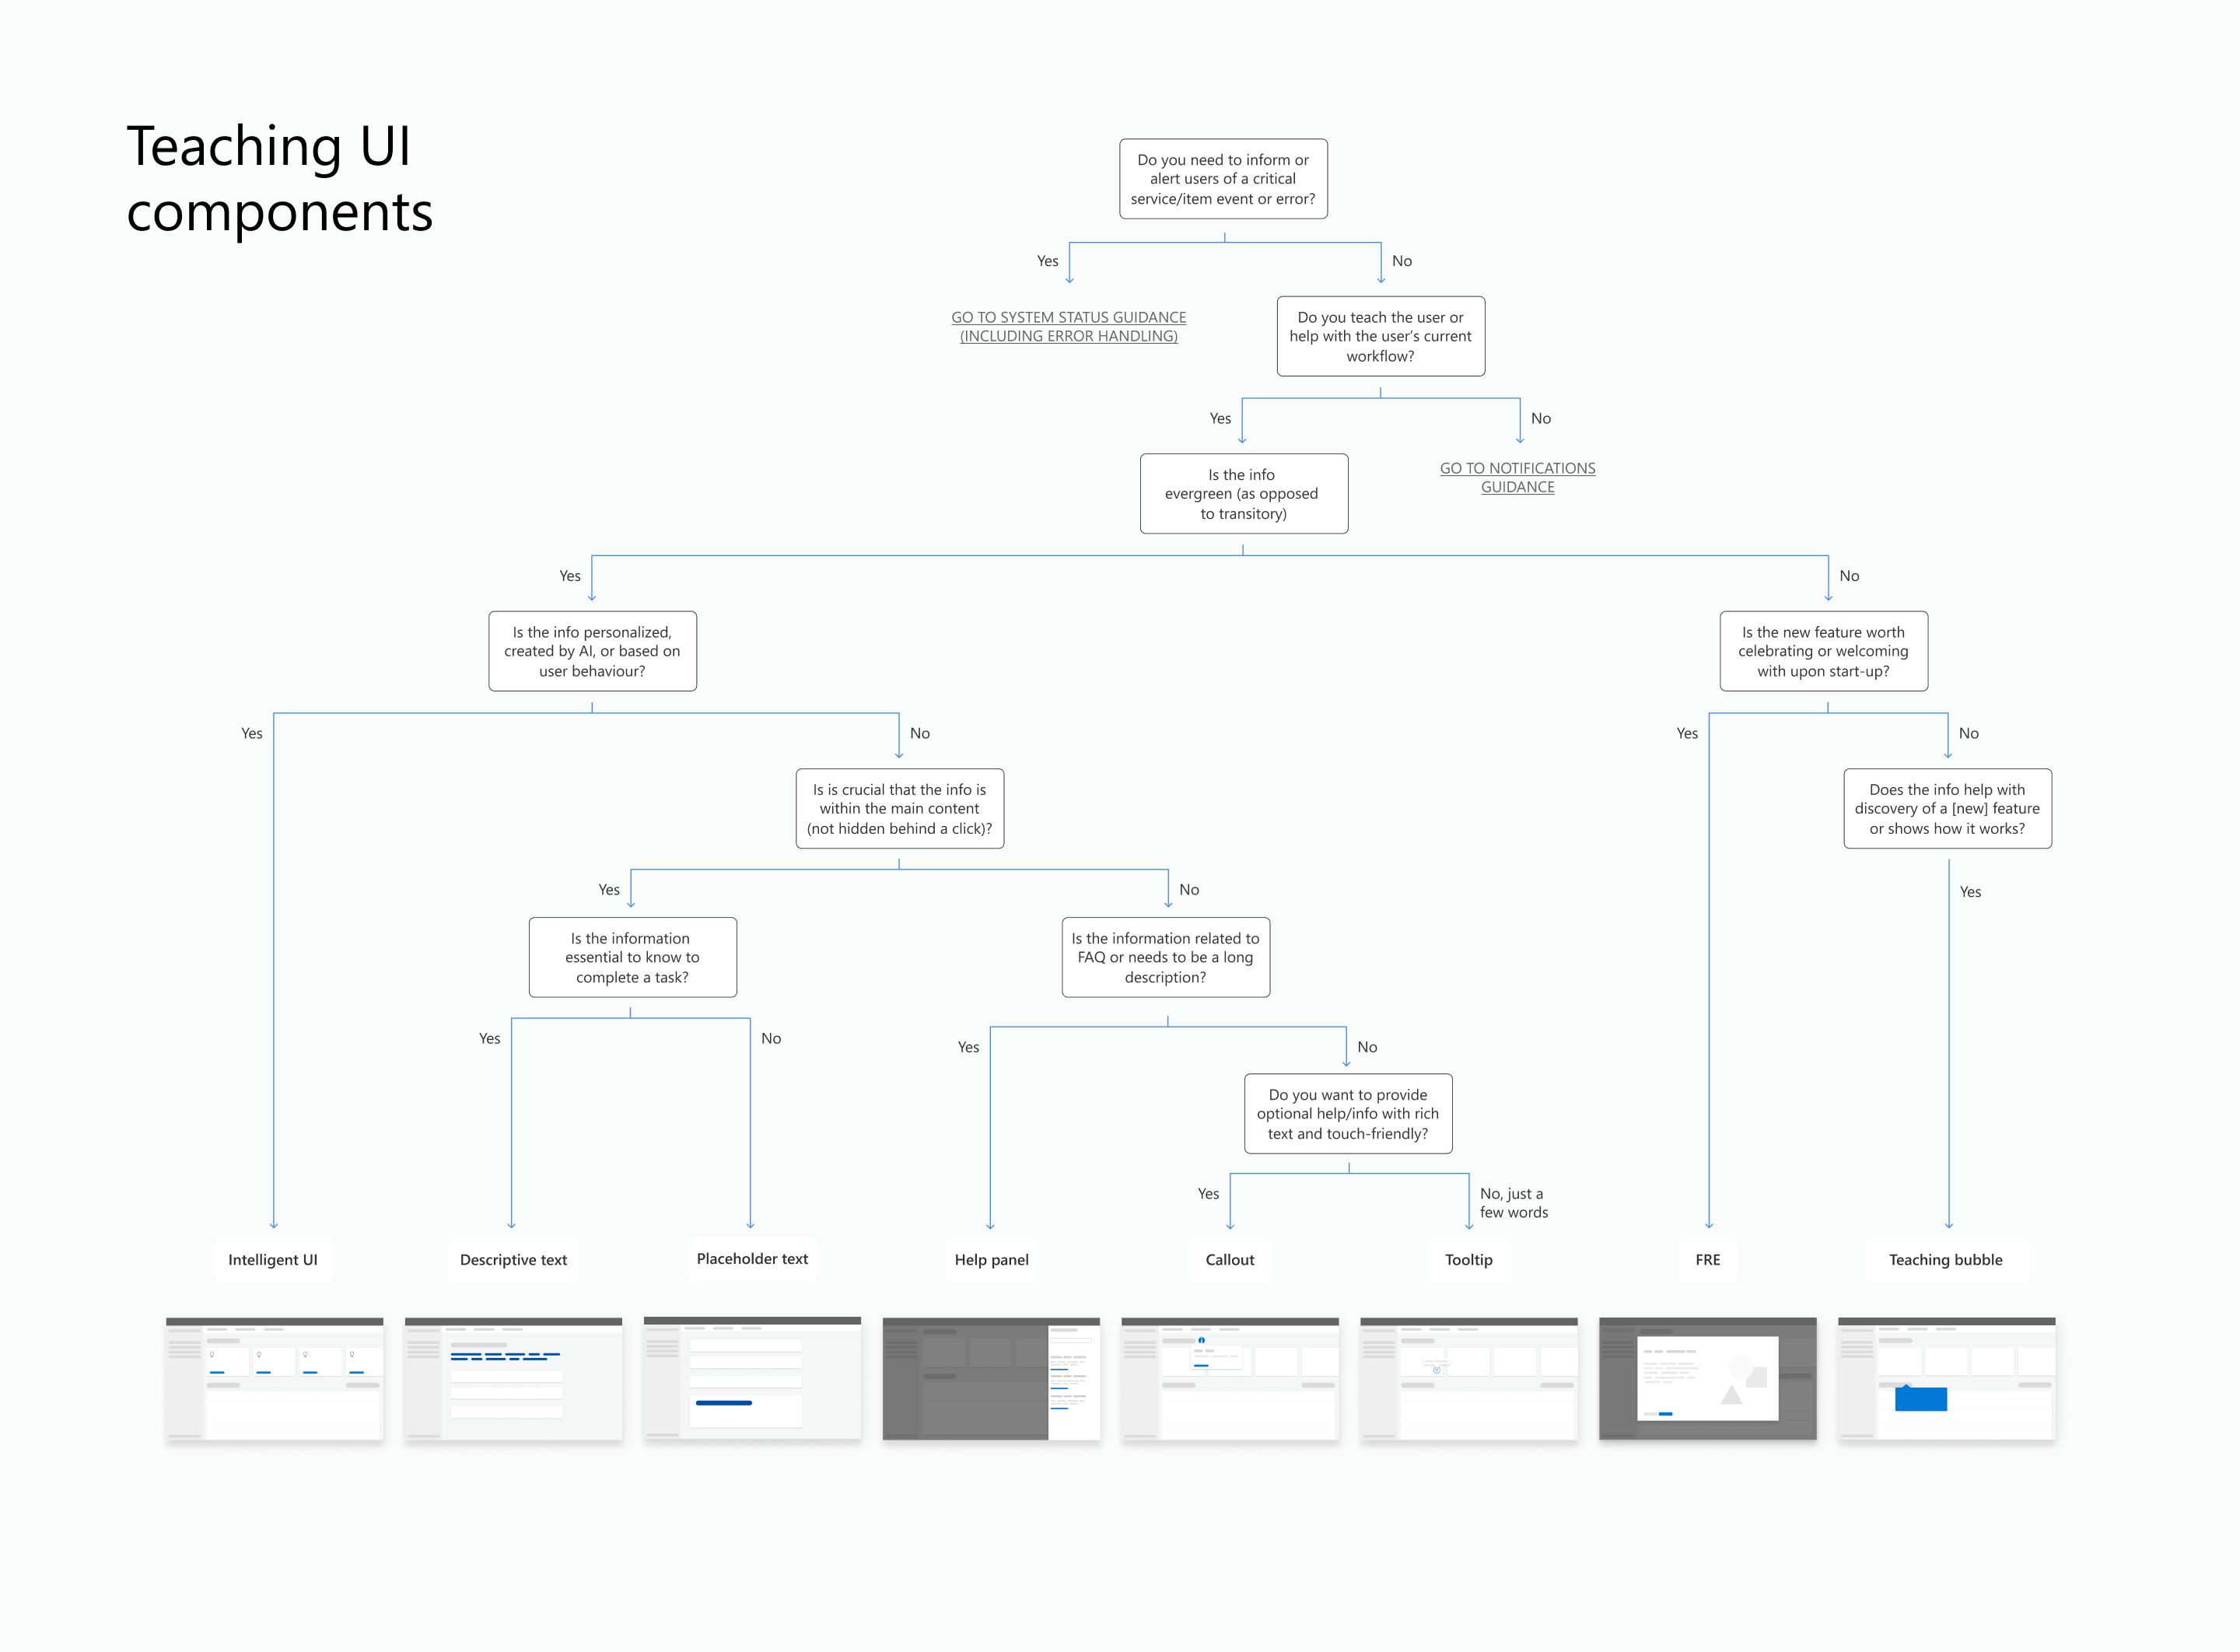 Decision tree for teaching UI components to help teams decide what to use